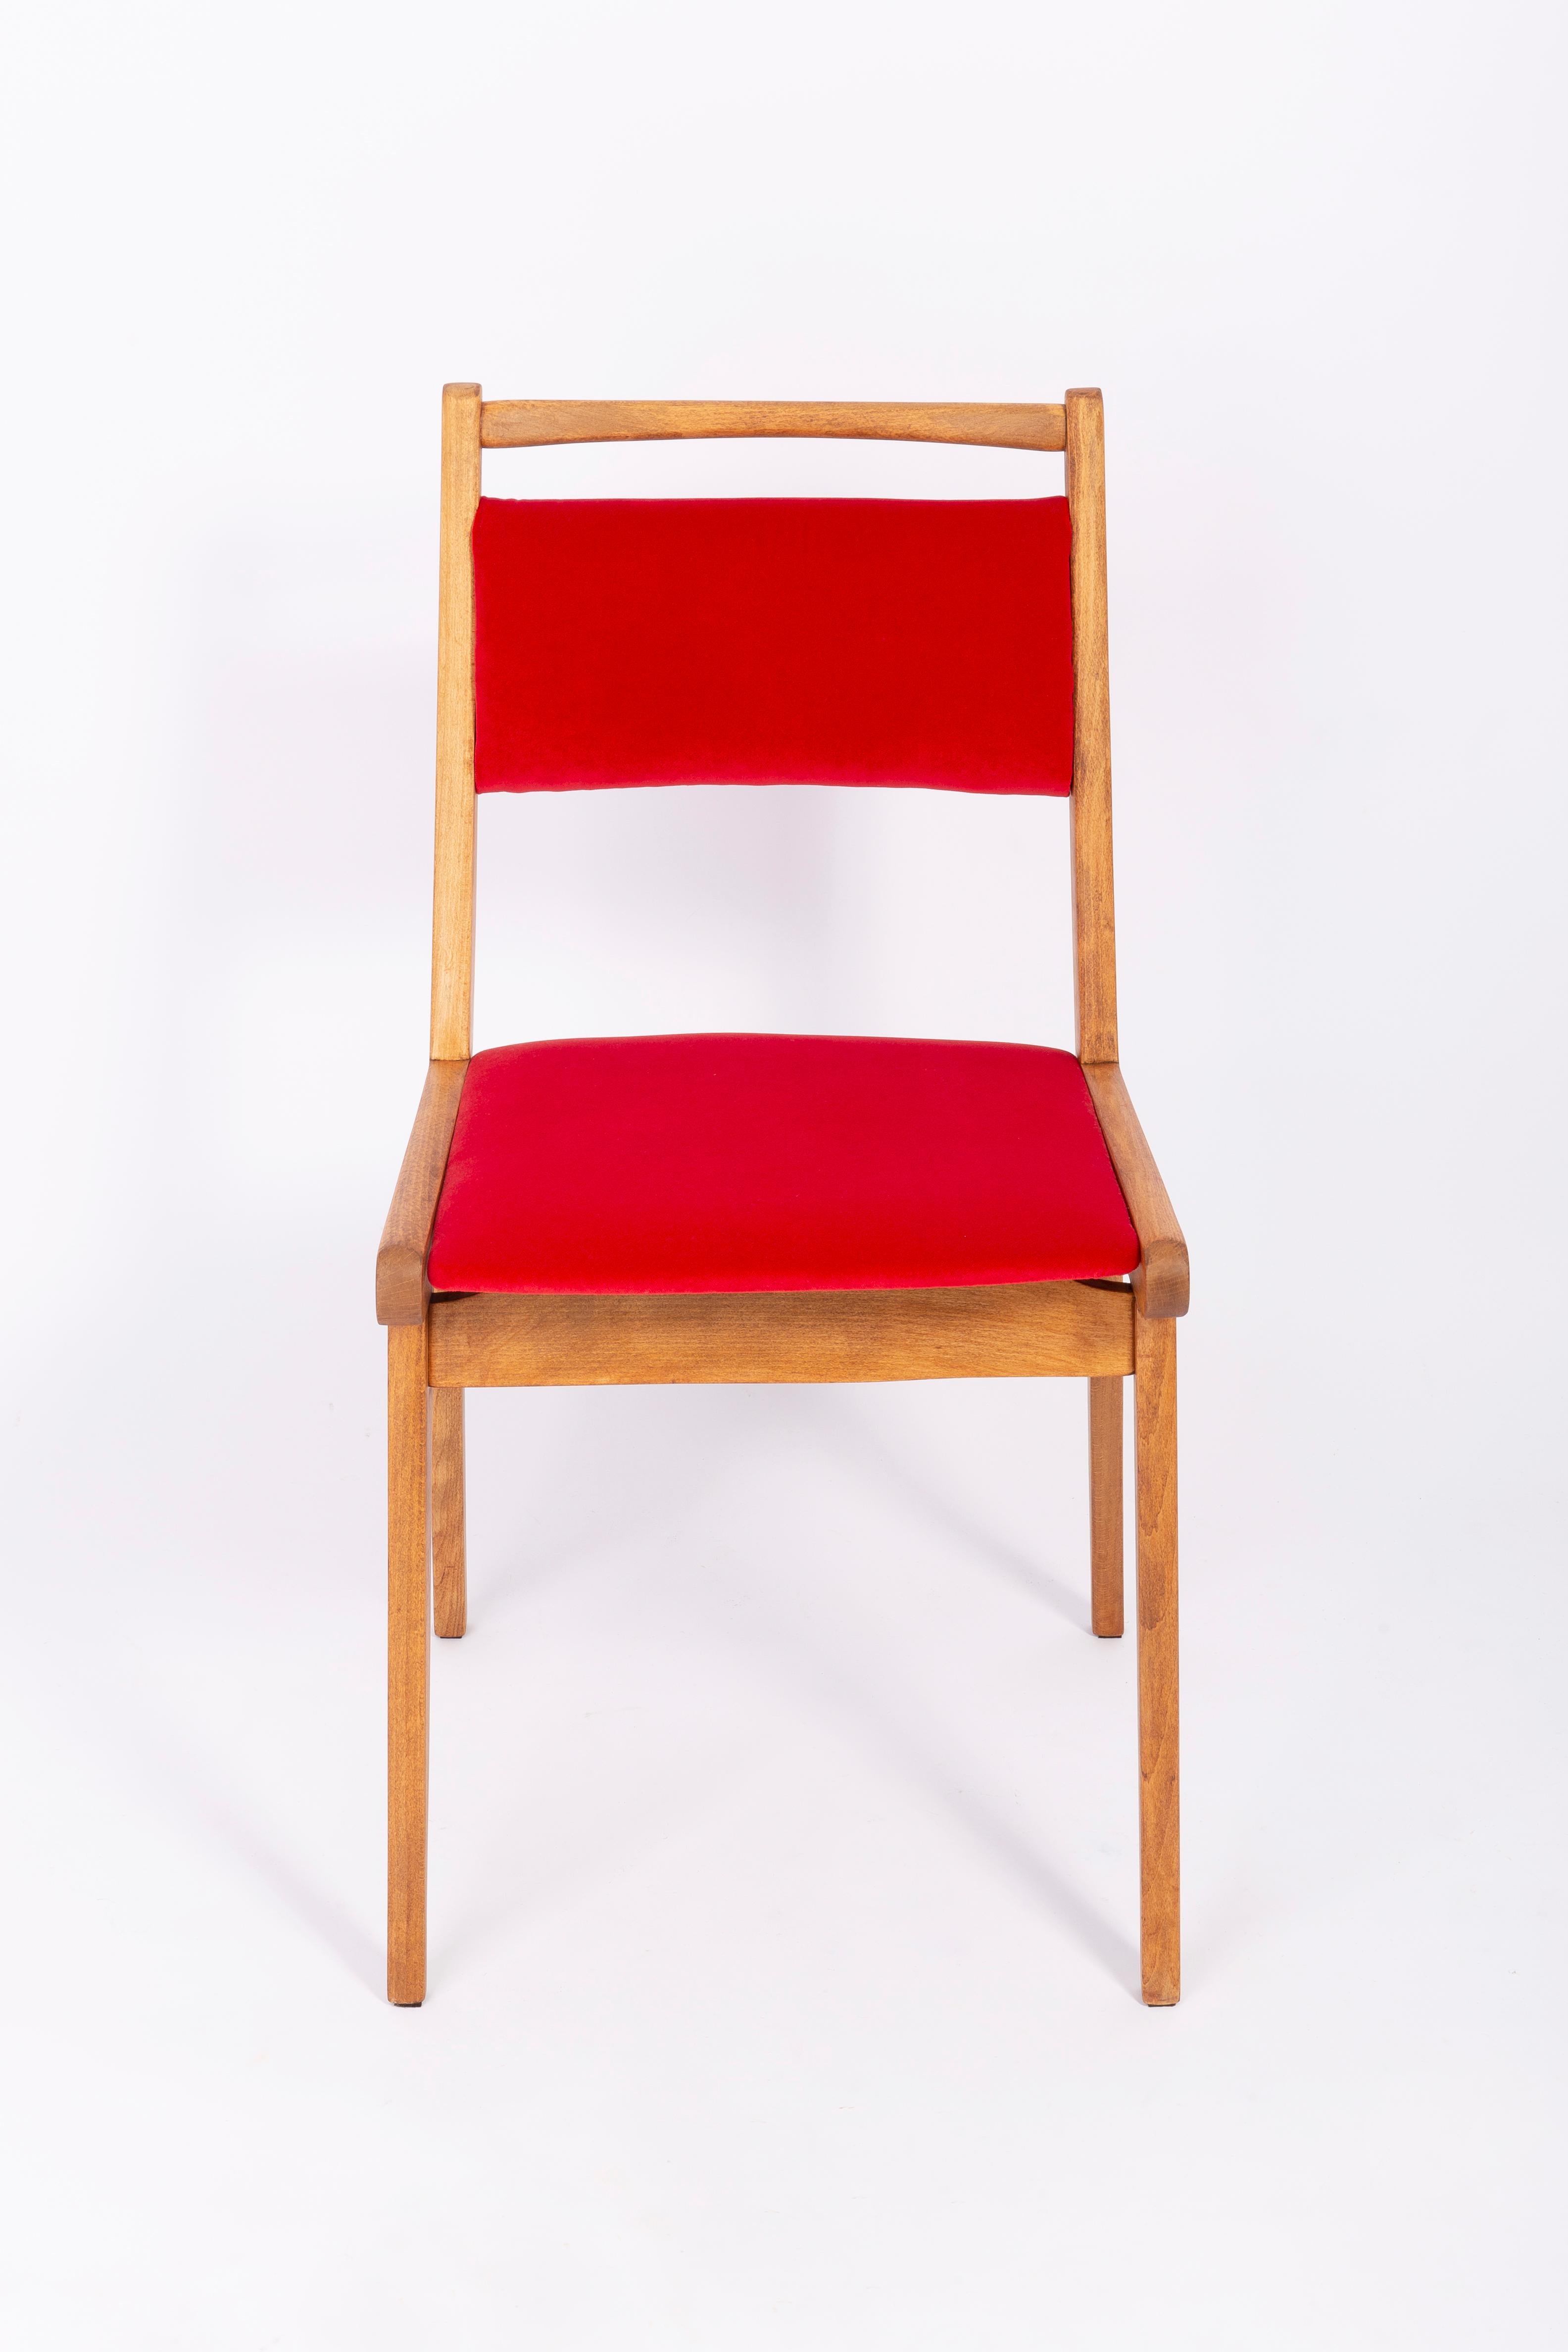 Beech Set of Four 20th Century Red Velvet Chairs, by Rajmund Halas, Poland, 1960s For Sale